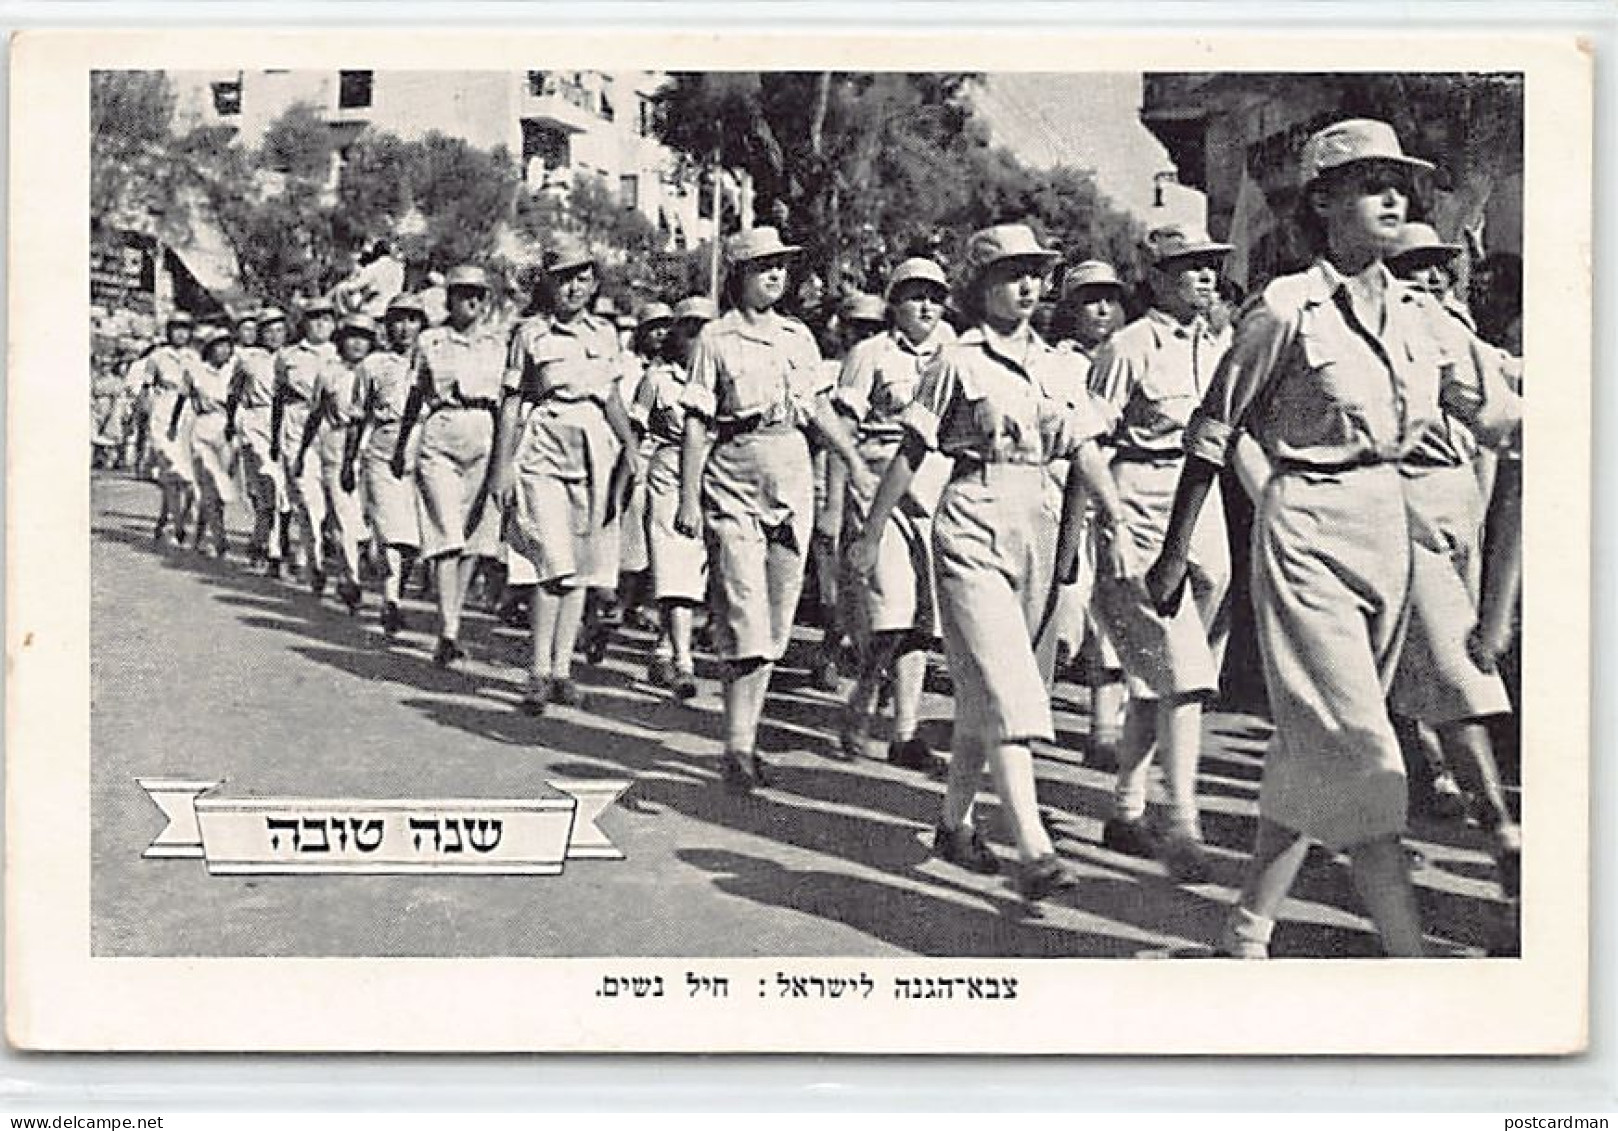 Israel Defence Forces - TSAHAL - Women's Corp - Publ. Soldiers' Welfare Committee - Israel